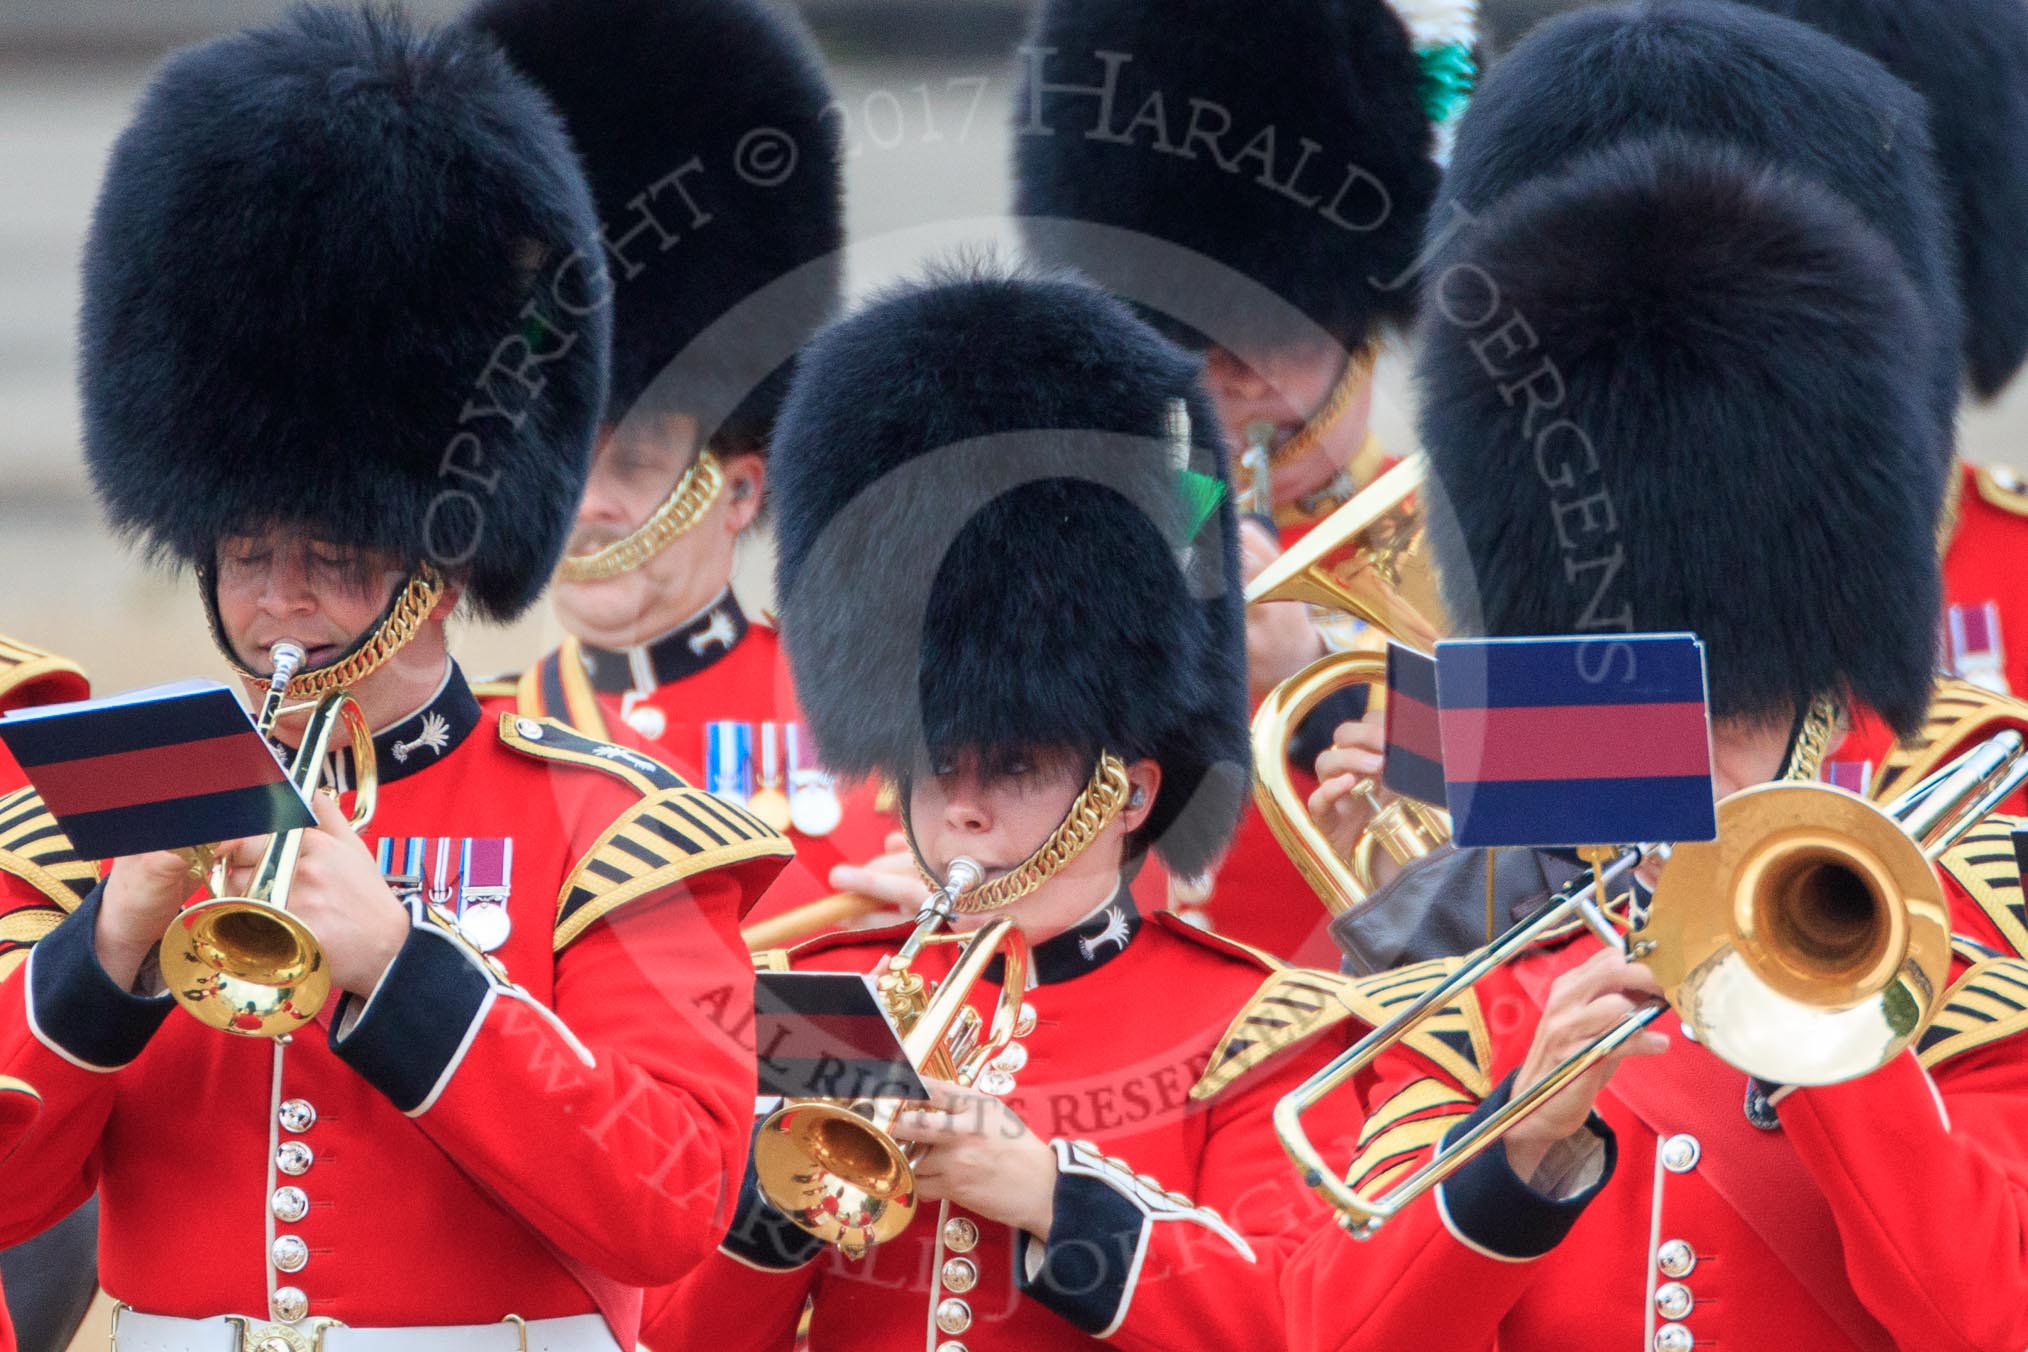 Musicians of the Band of the Welsh Guards marching onto Horse Guards Parade during The Colonel's Review 2018 (final rehearsal for Trooping the Colour, The Queen's Birthday Parade)  at Horse Guards Parade, Westminster, London, 2 June 2018, 10:14.